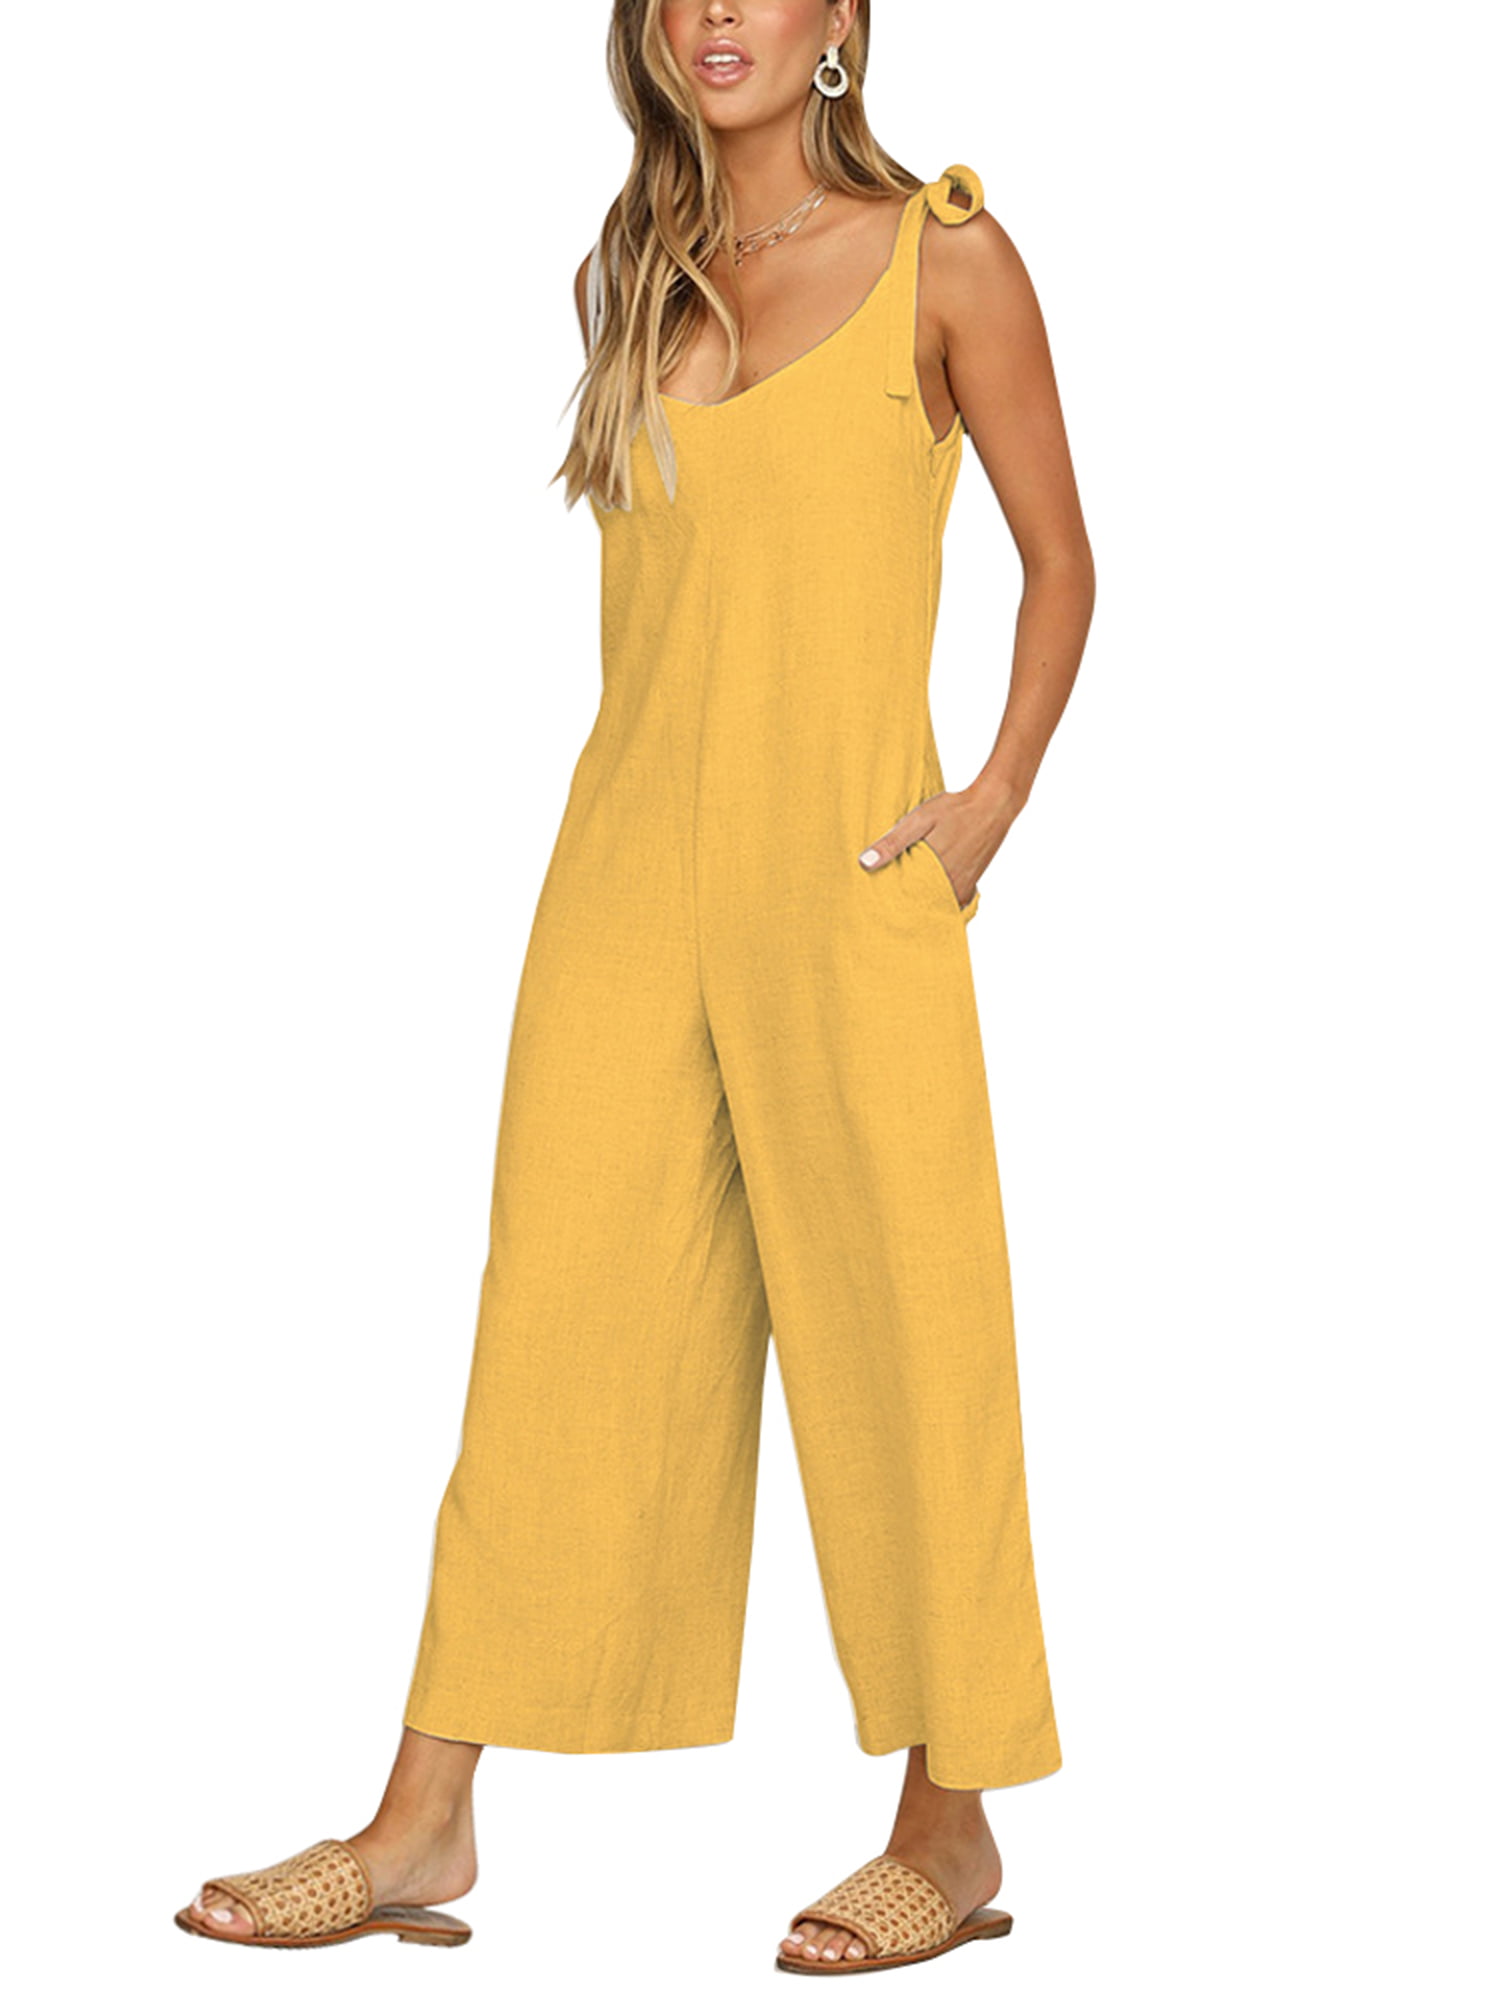 Women Spaghetti Strap Jumpsuit Tie Back Knot Solid Loose Rompers Wide Leg Palazzo Pants 2019 Summer Casual Outfits Comfy Beach Overall Romper with Pockets